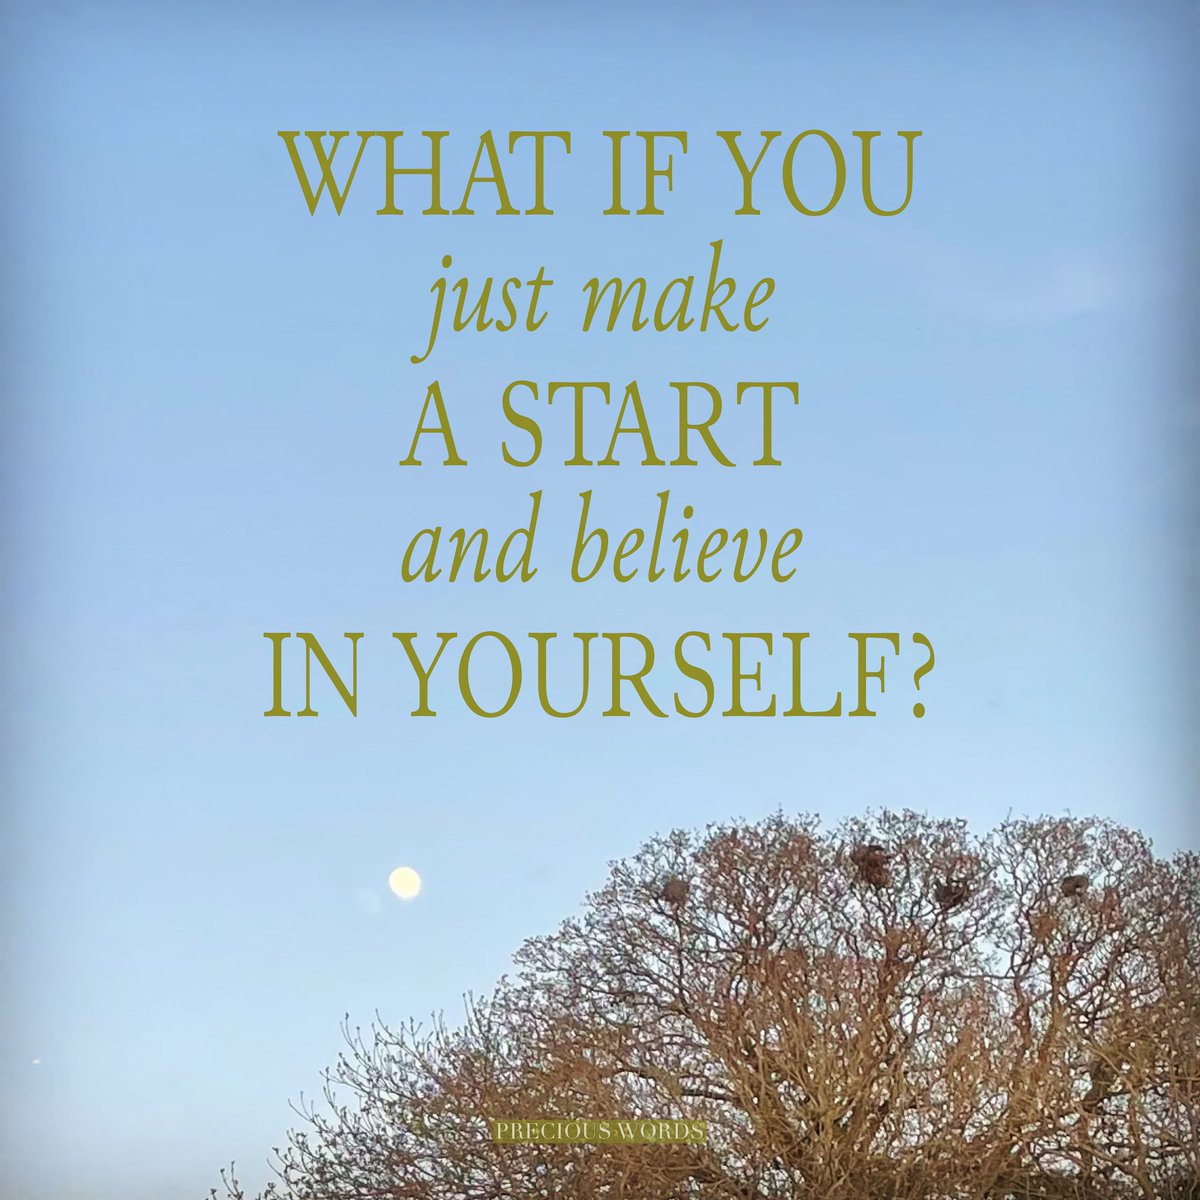 What if you just make a start, believe in yourself?
#whatif #makeastart #believe #believeinyourself #preciouswordstoliveby #preciouswords